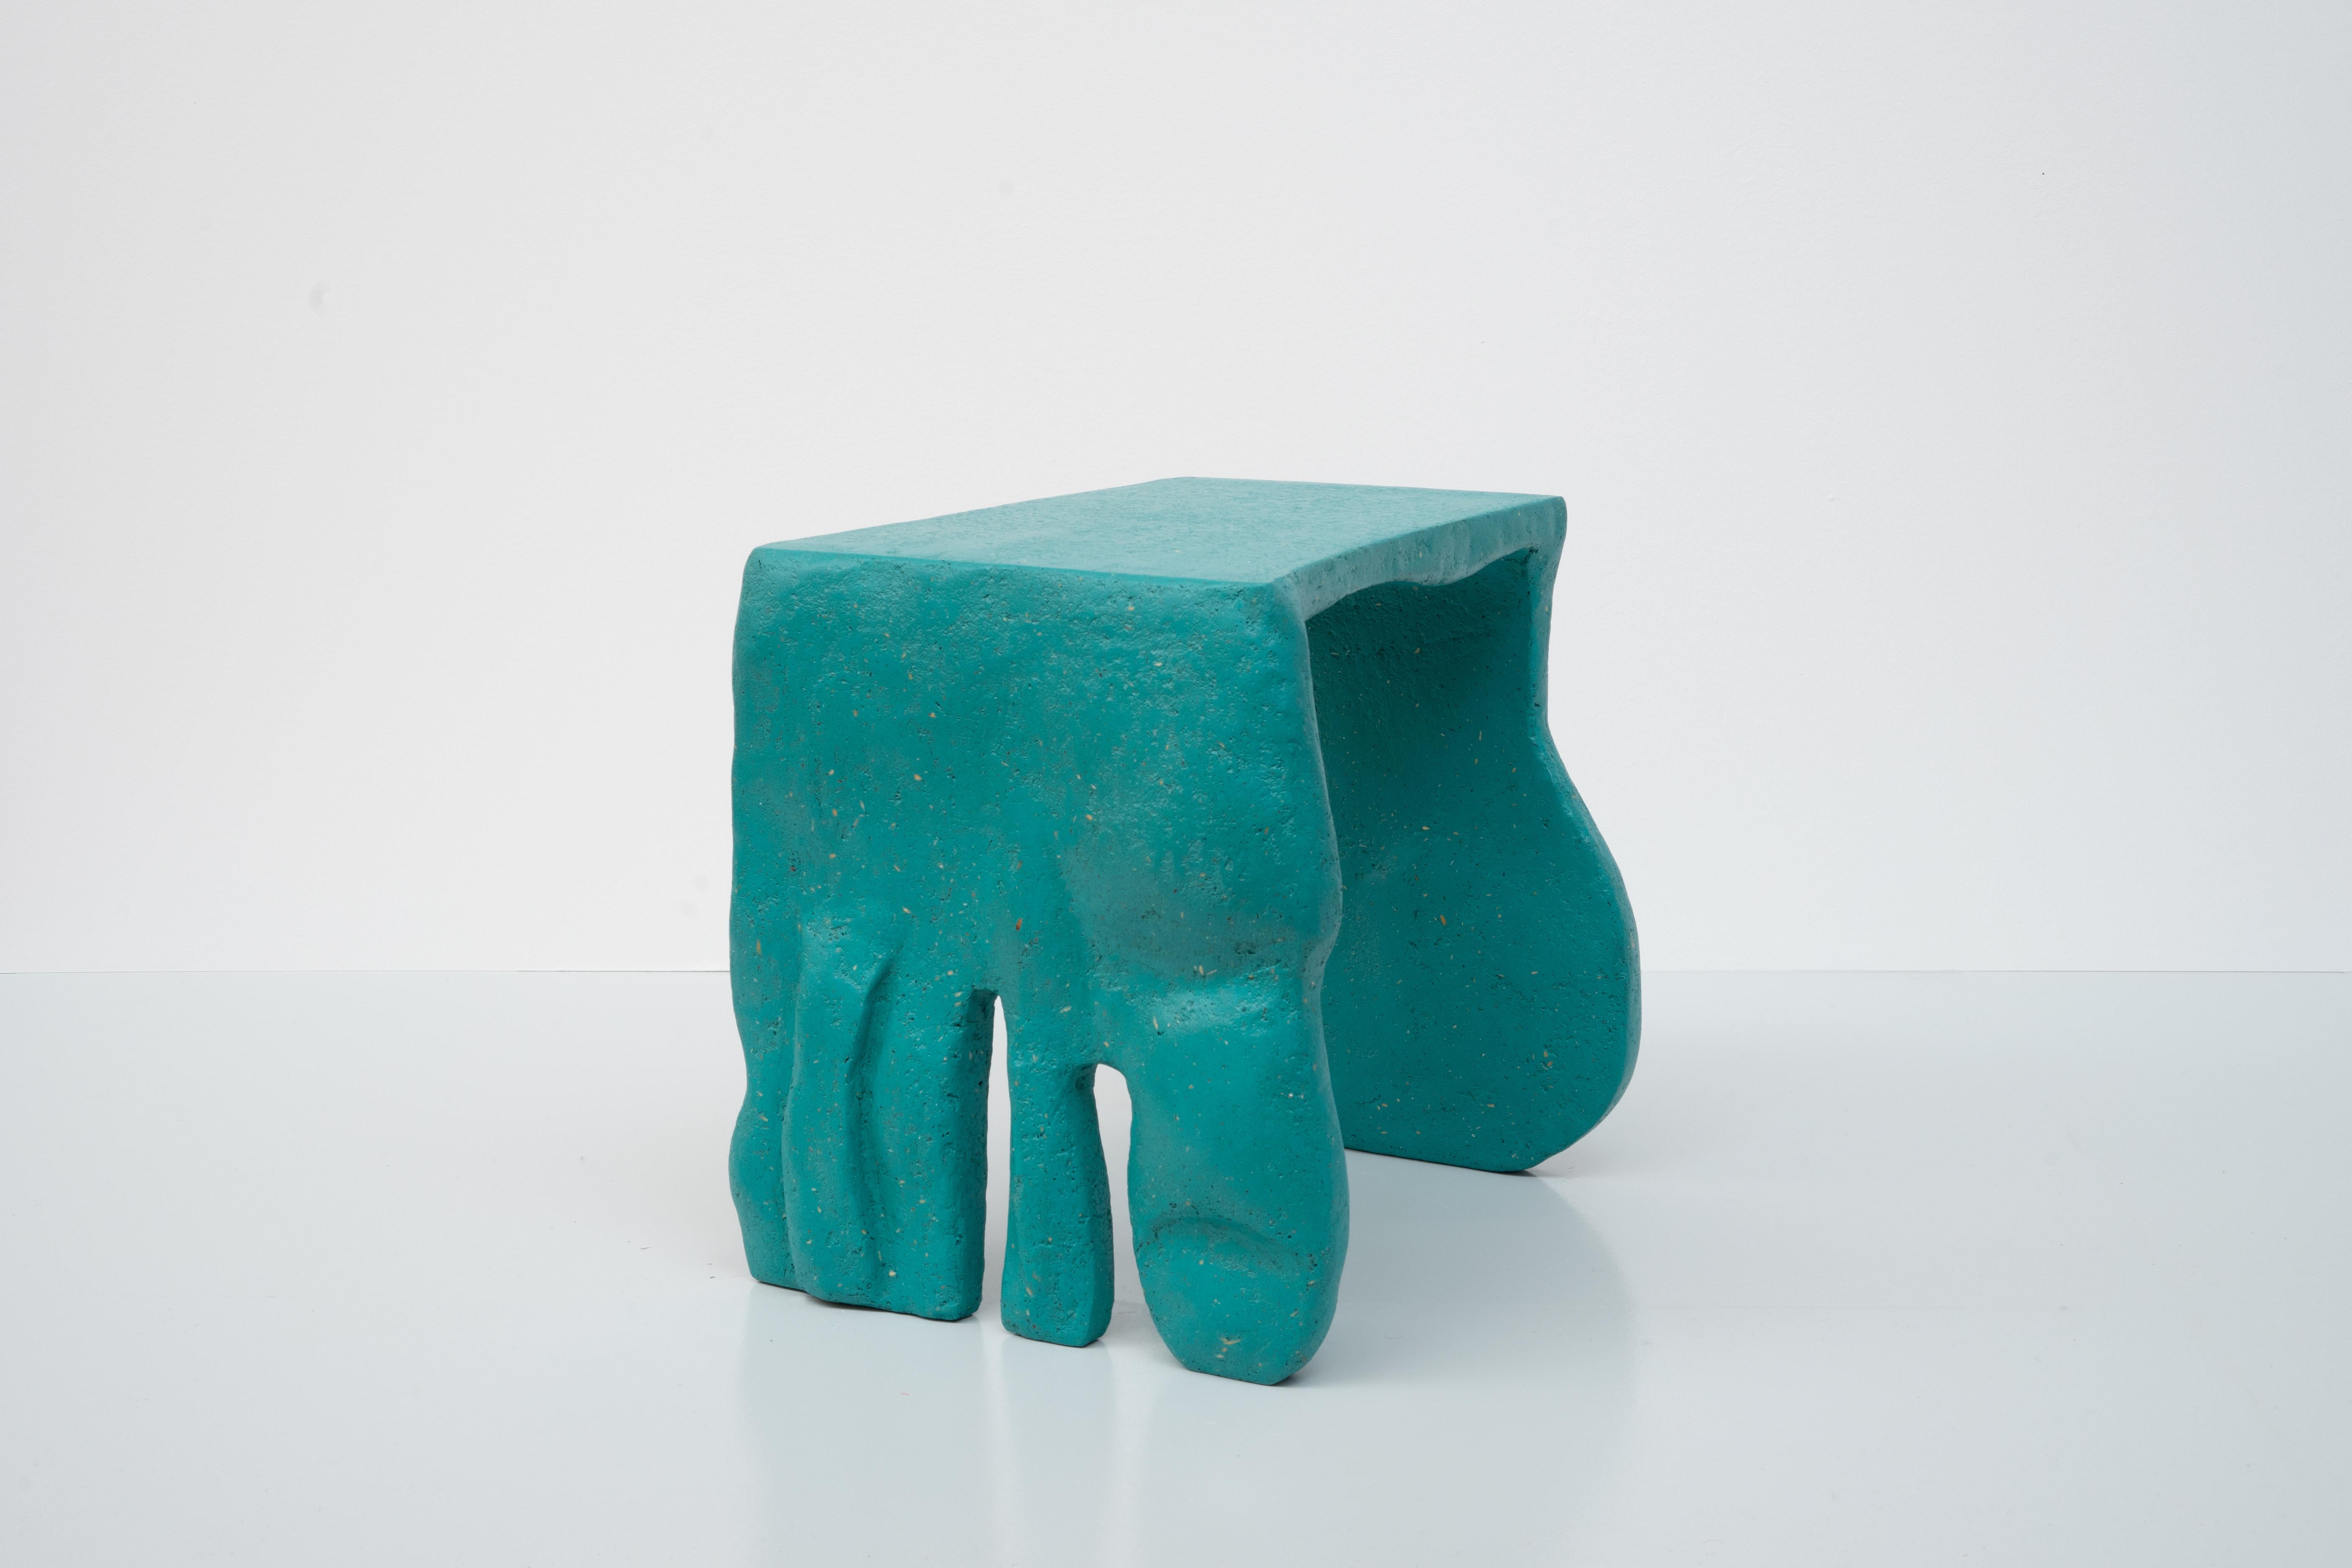 Barbora Žilinskaitė [Lithuanian, b. 1996]
Roommates Stool [Turquoise], 2020
Wood dust, ply, pigment, varnish, glue
17.25 x 17.25 x 13.75 inches
44 x 44 x 35 cm
Edition of 10

Born in 1996 in Kaunas, Lithuania, Barbora Žilinskaite is a designer